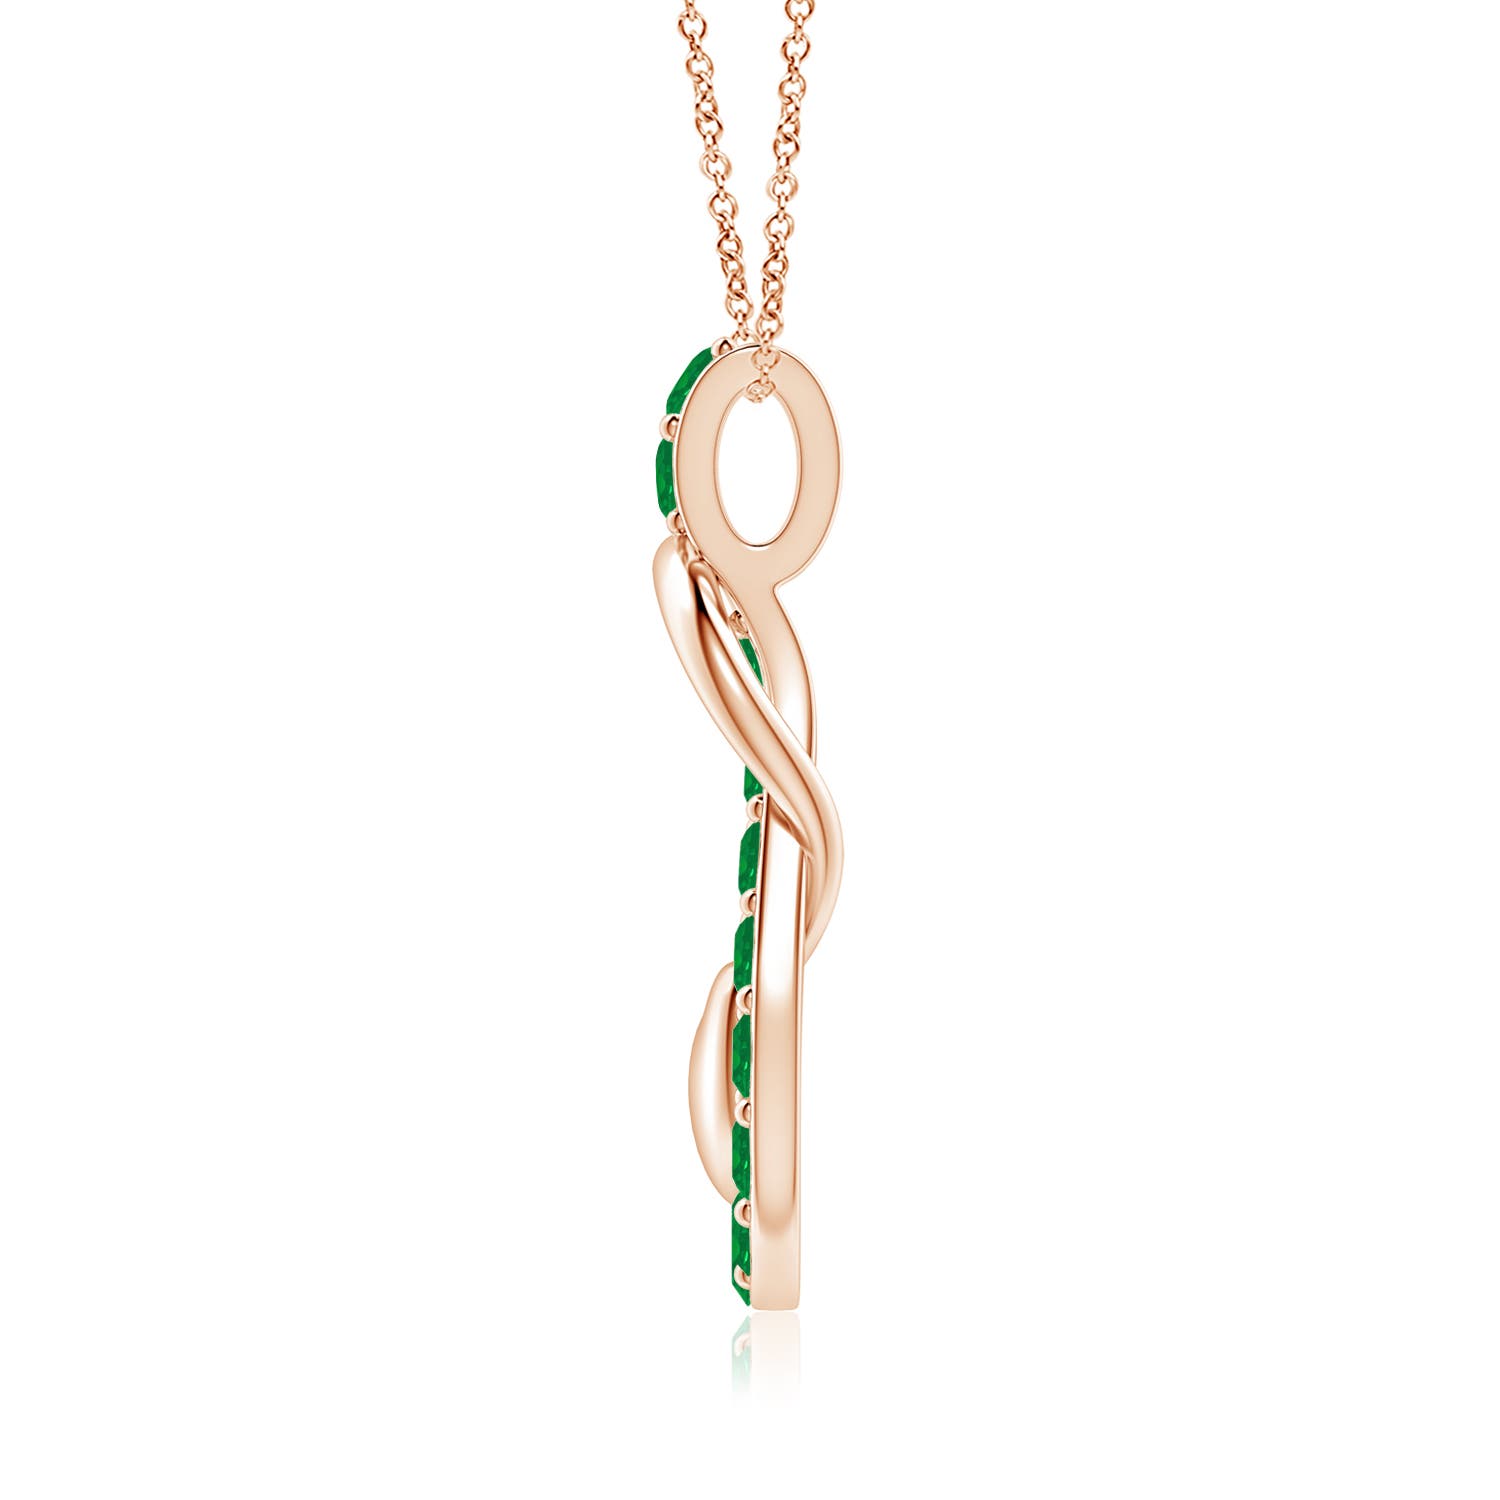 AA - Emerald / 2.85 CT / 14 KT Rose Gold